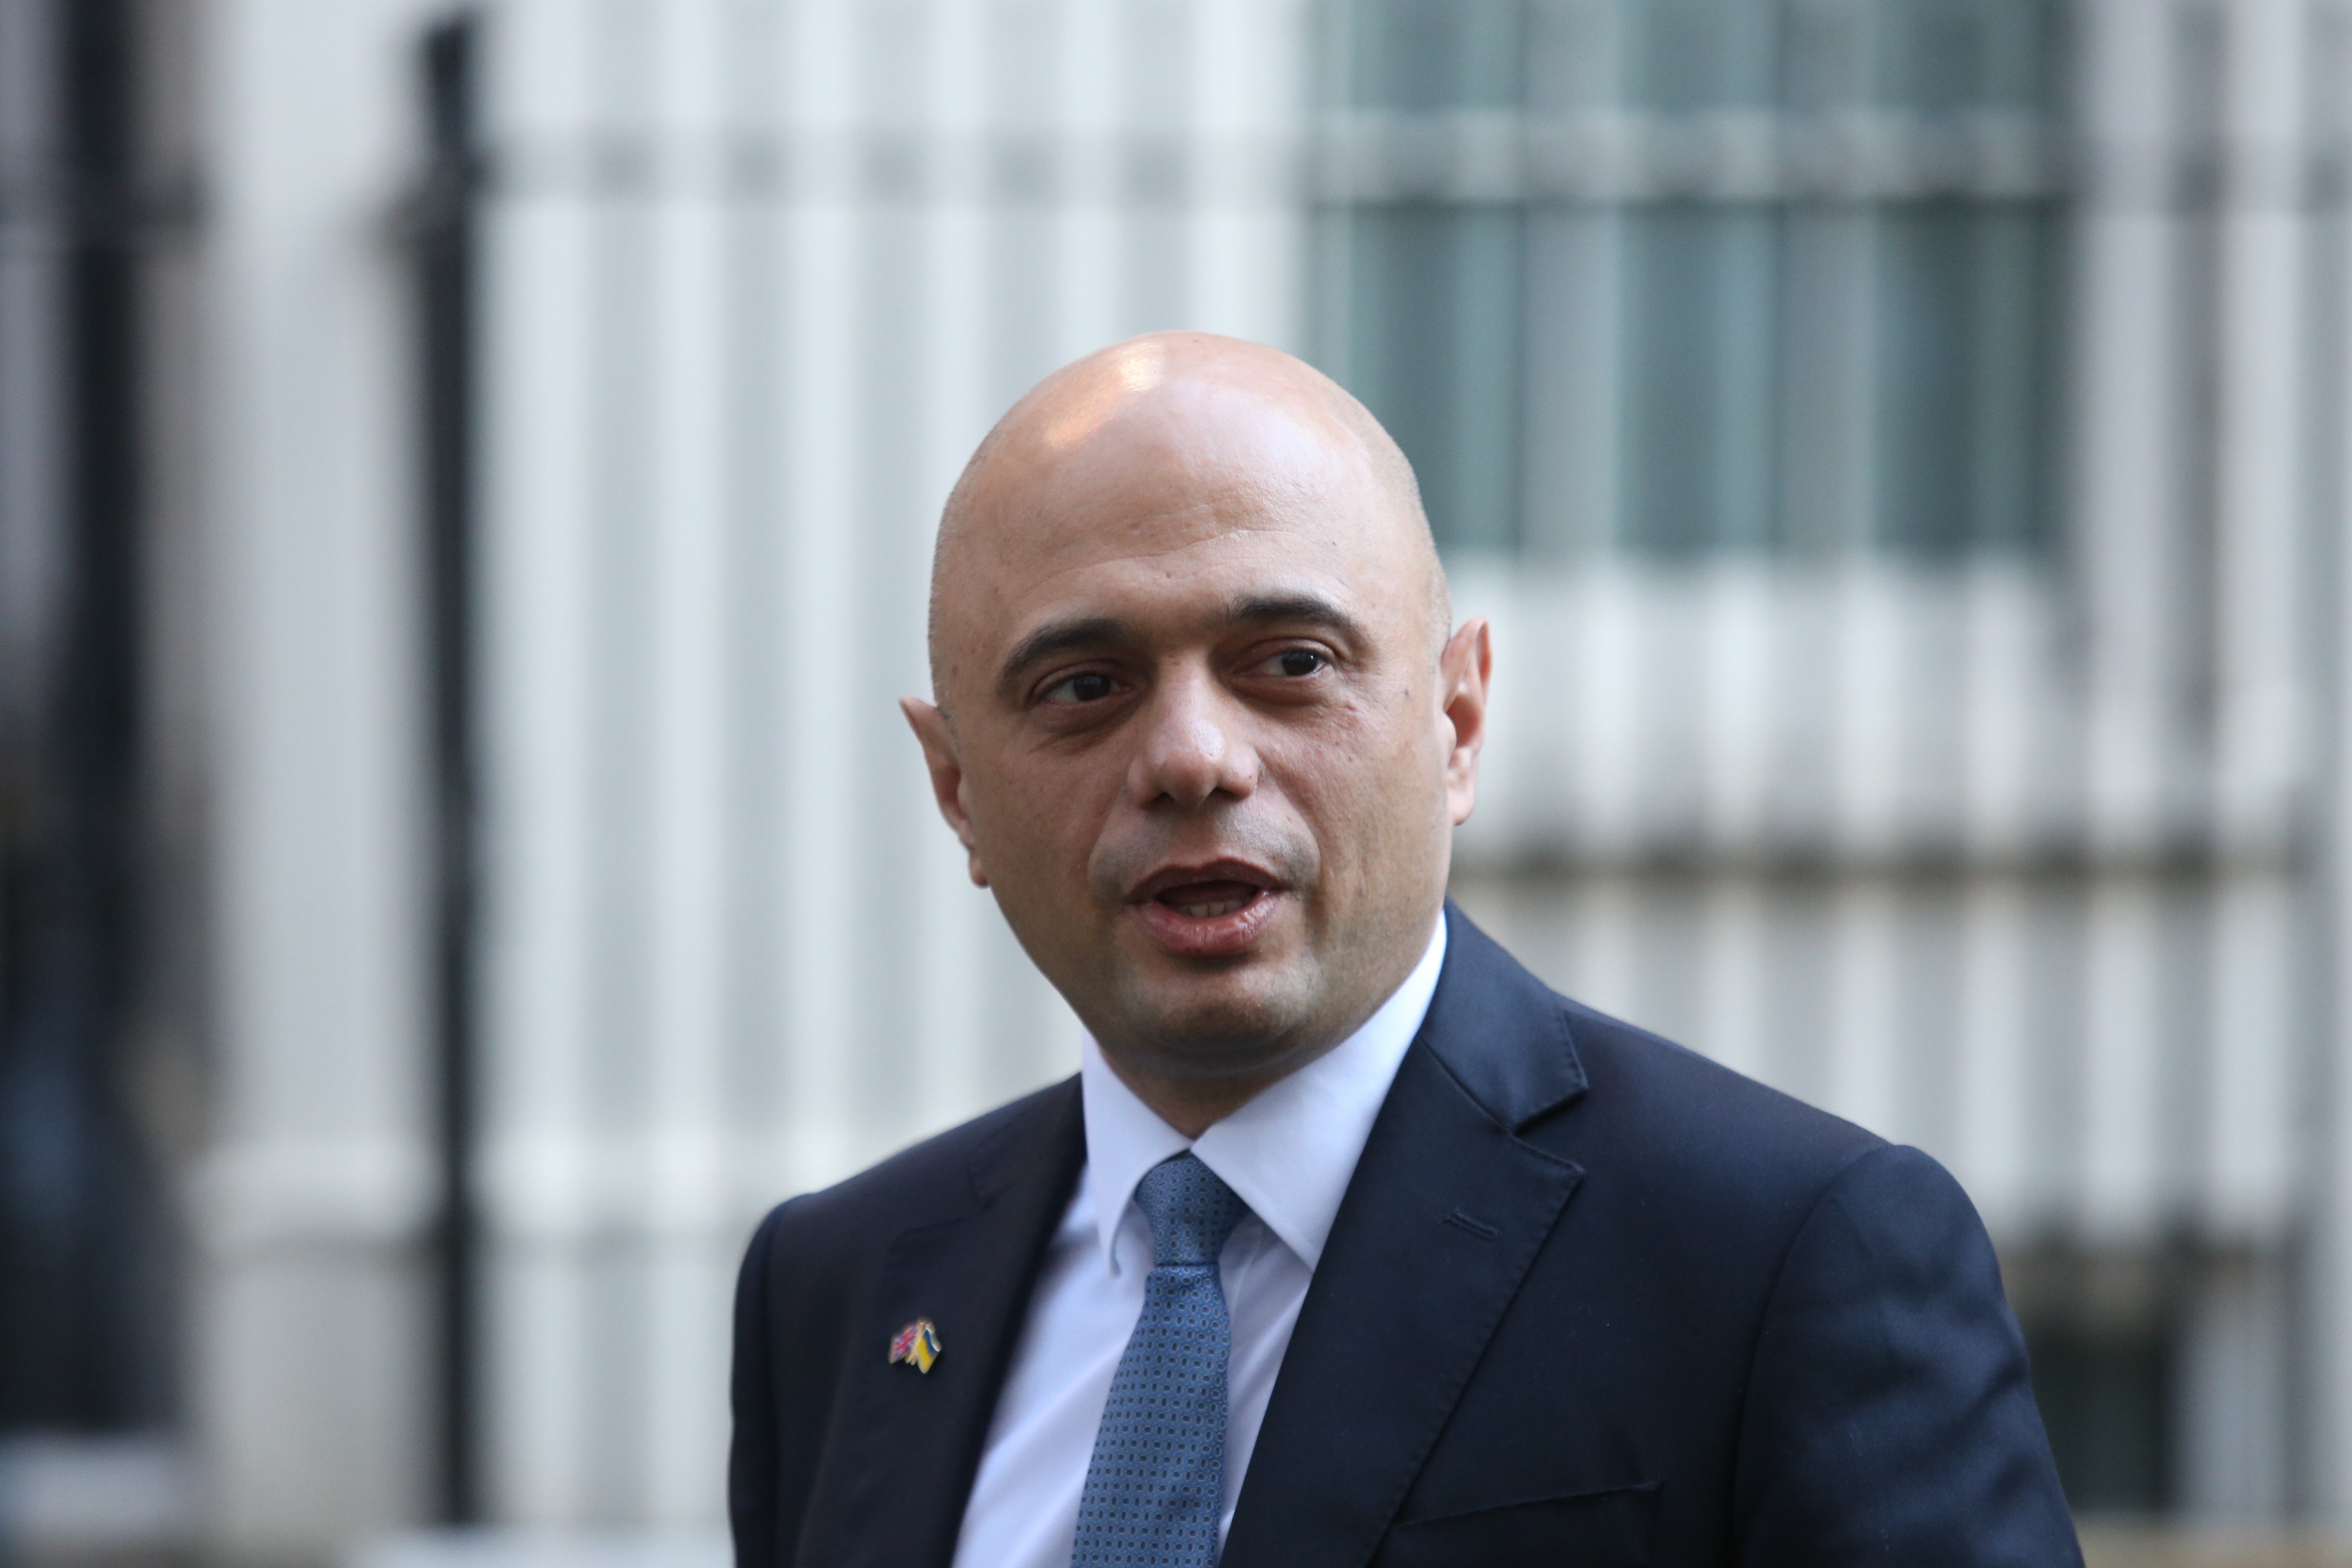 Heath secretary Sajid Javid said a fourth jab would be offered to all adults before the end of this year